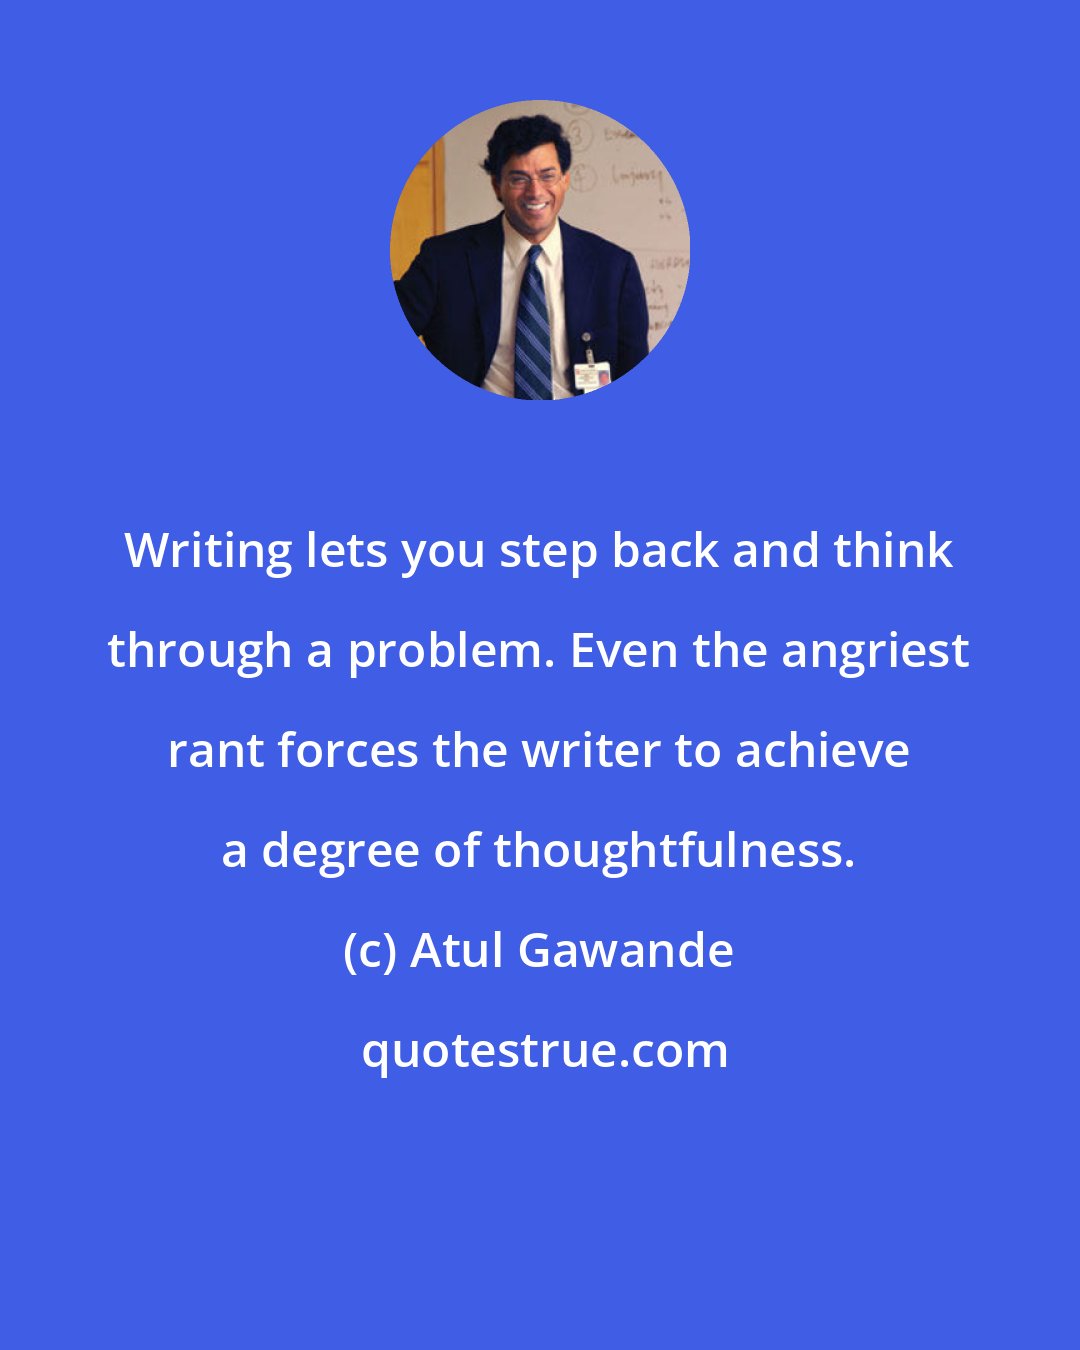 Atul Gawande: Writing lets you step back and think through a problem. Even the angriest rant forces the writer to achieve a degree of thoughtfulness.